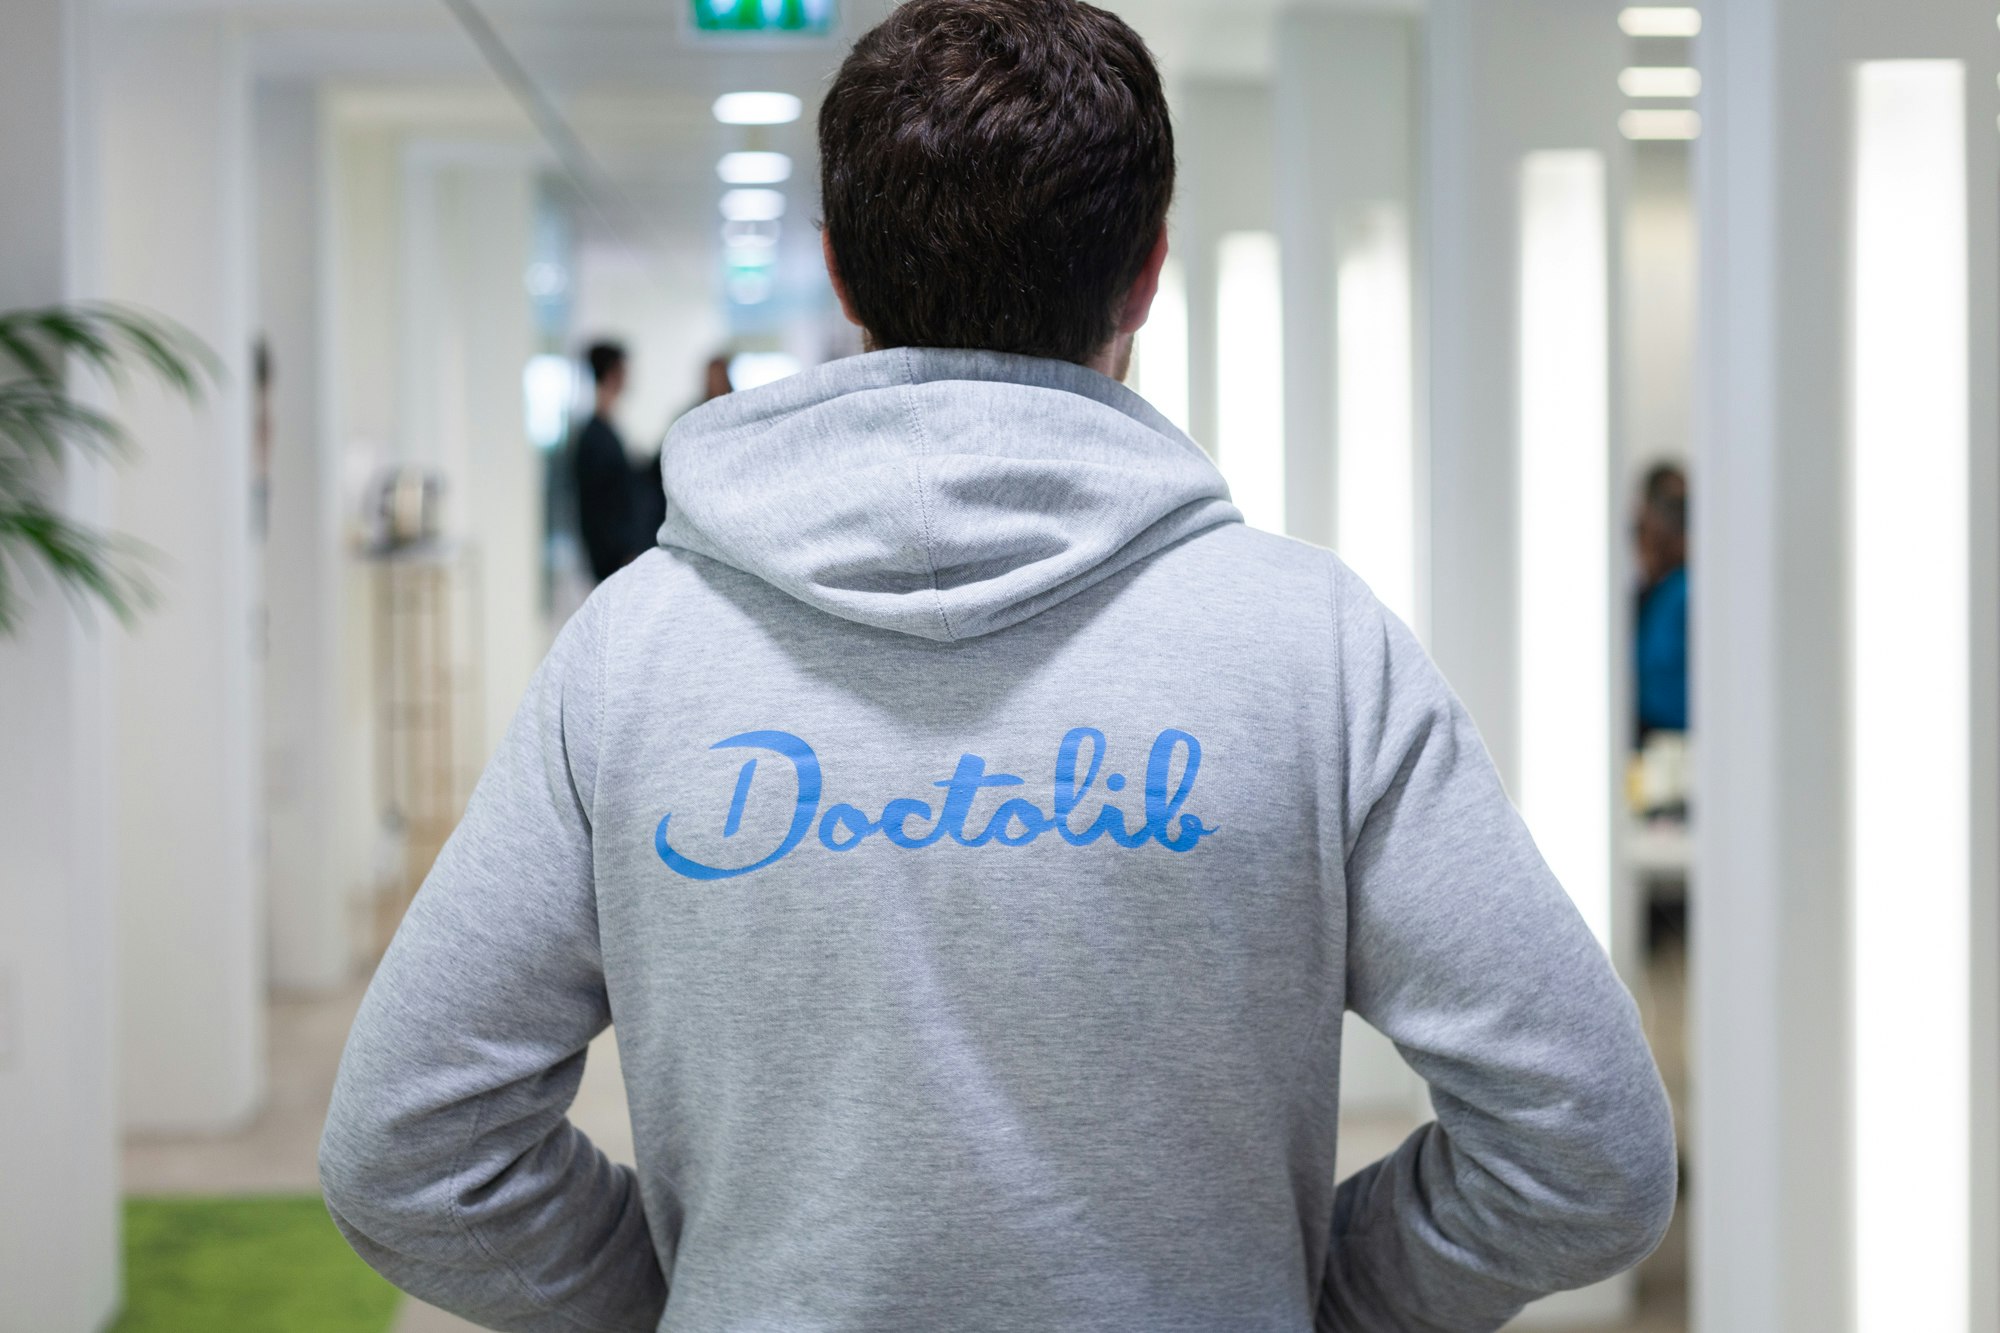 A photo of a man wearing a hoodie with the Doctolib logo